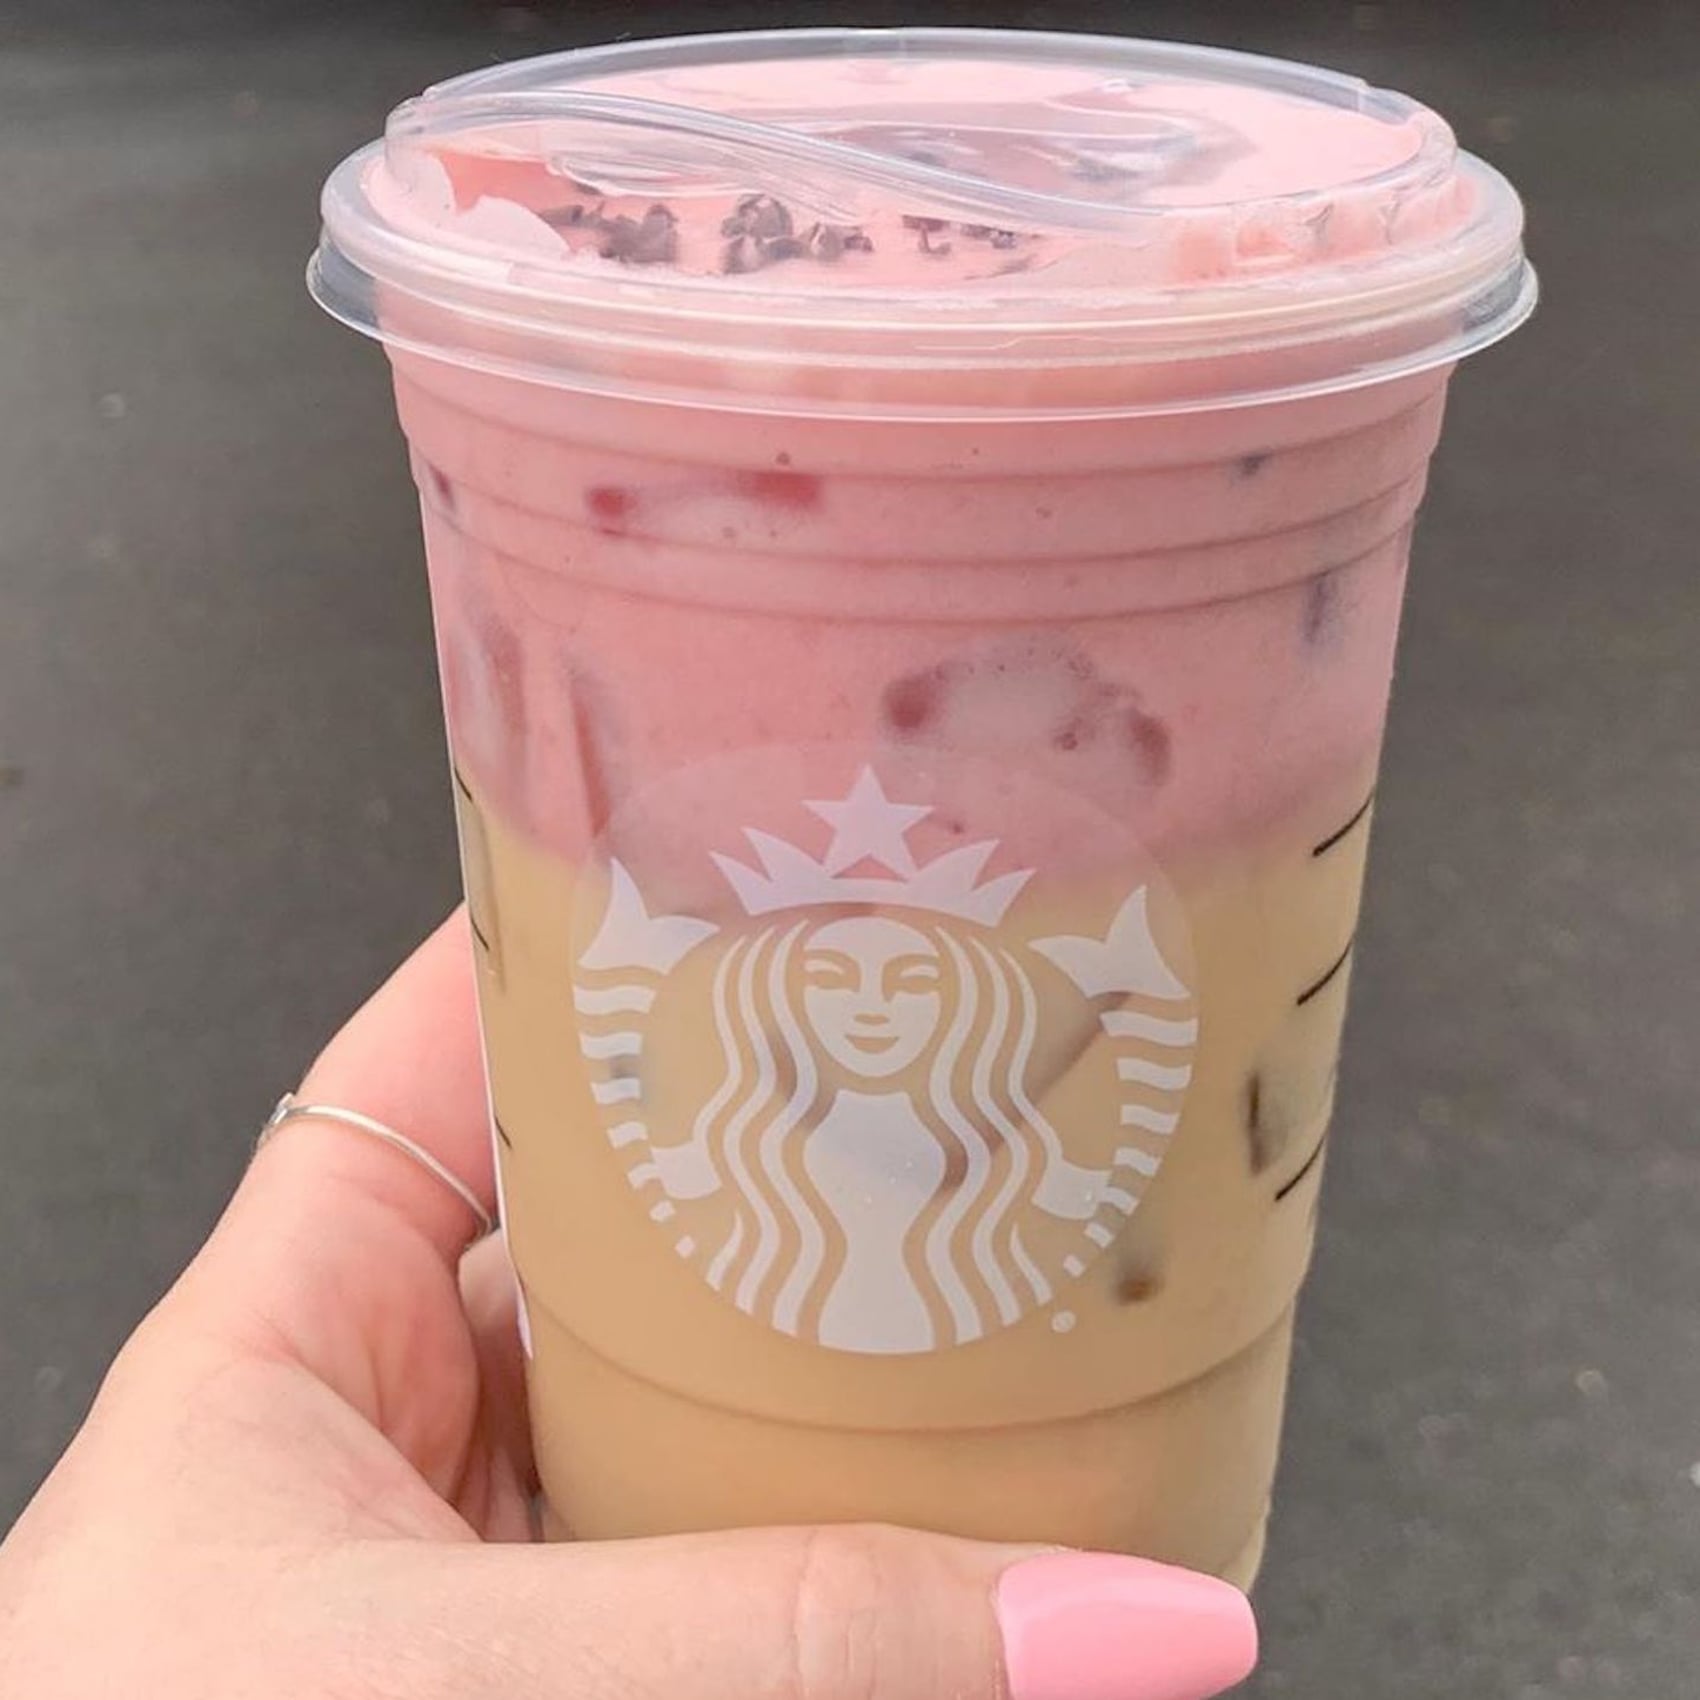 Starbucks Cold Foam: 2 drinks with a delicious frothy top! 